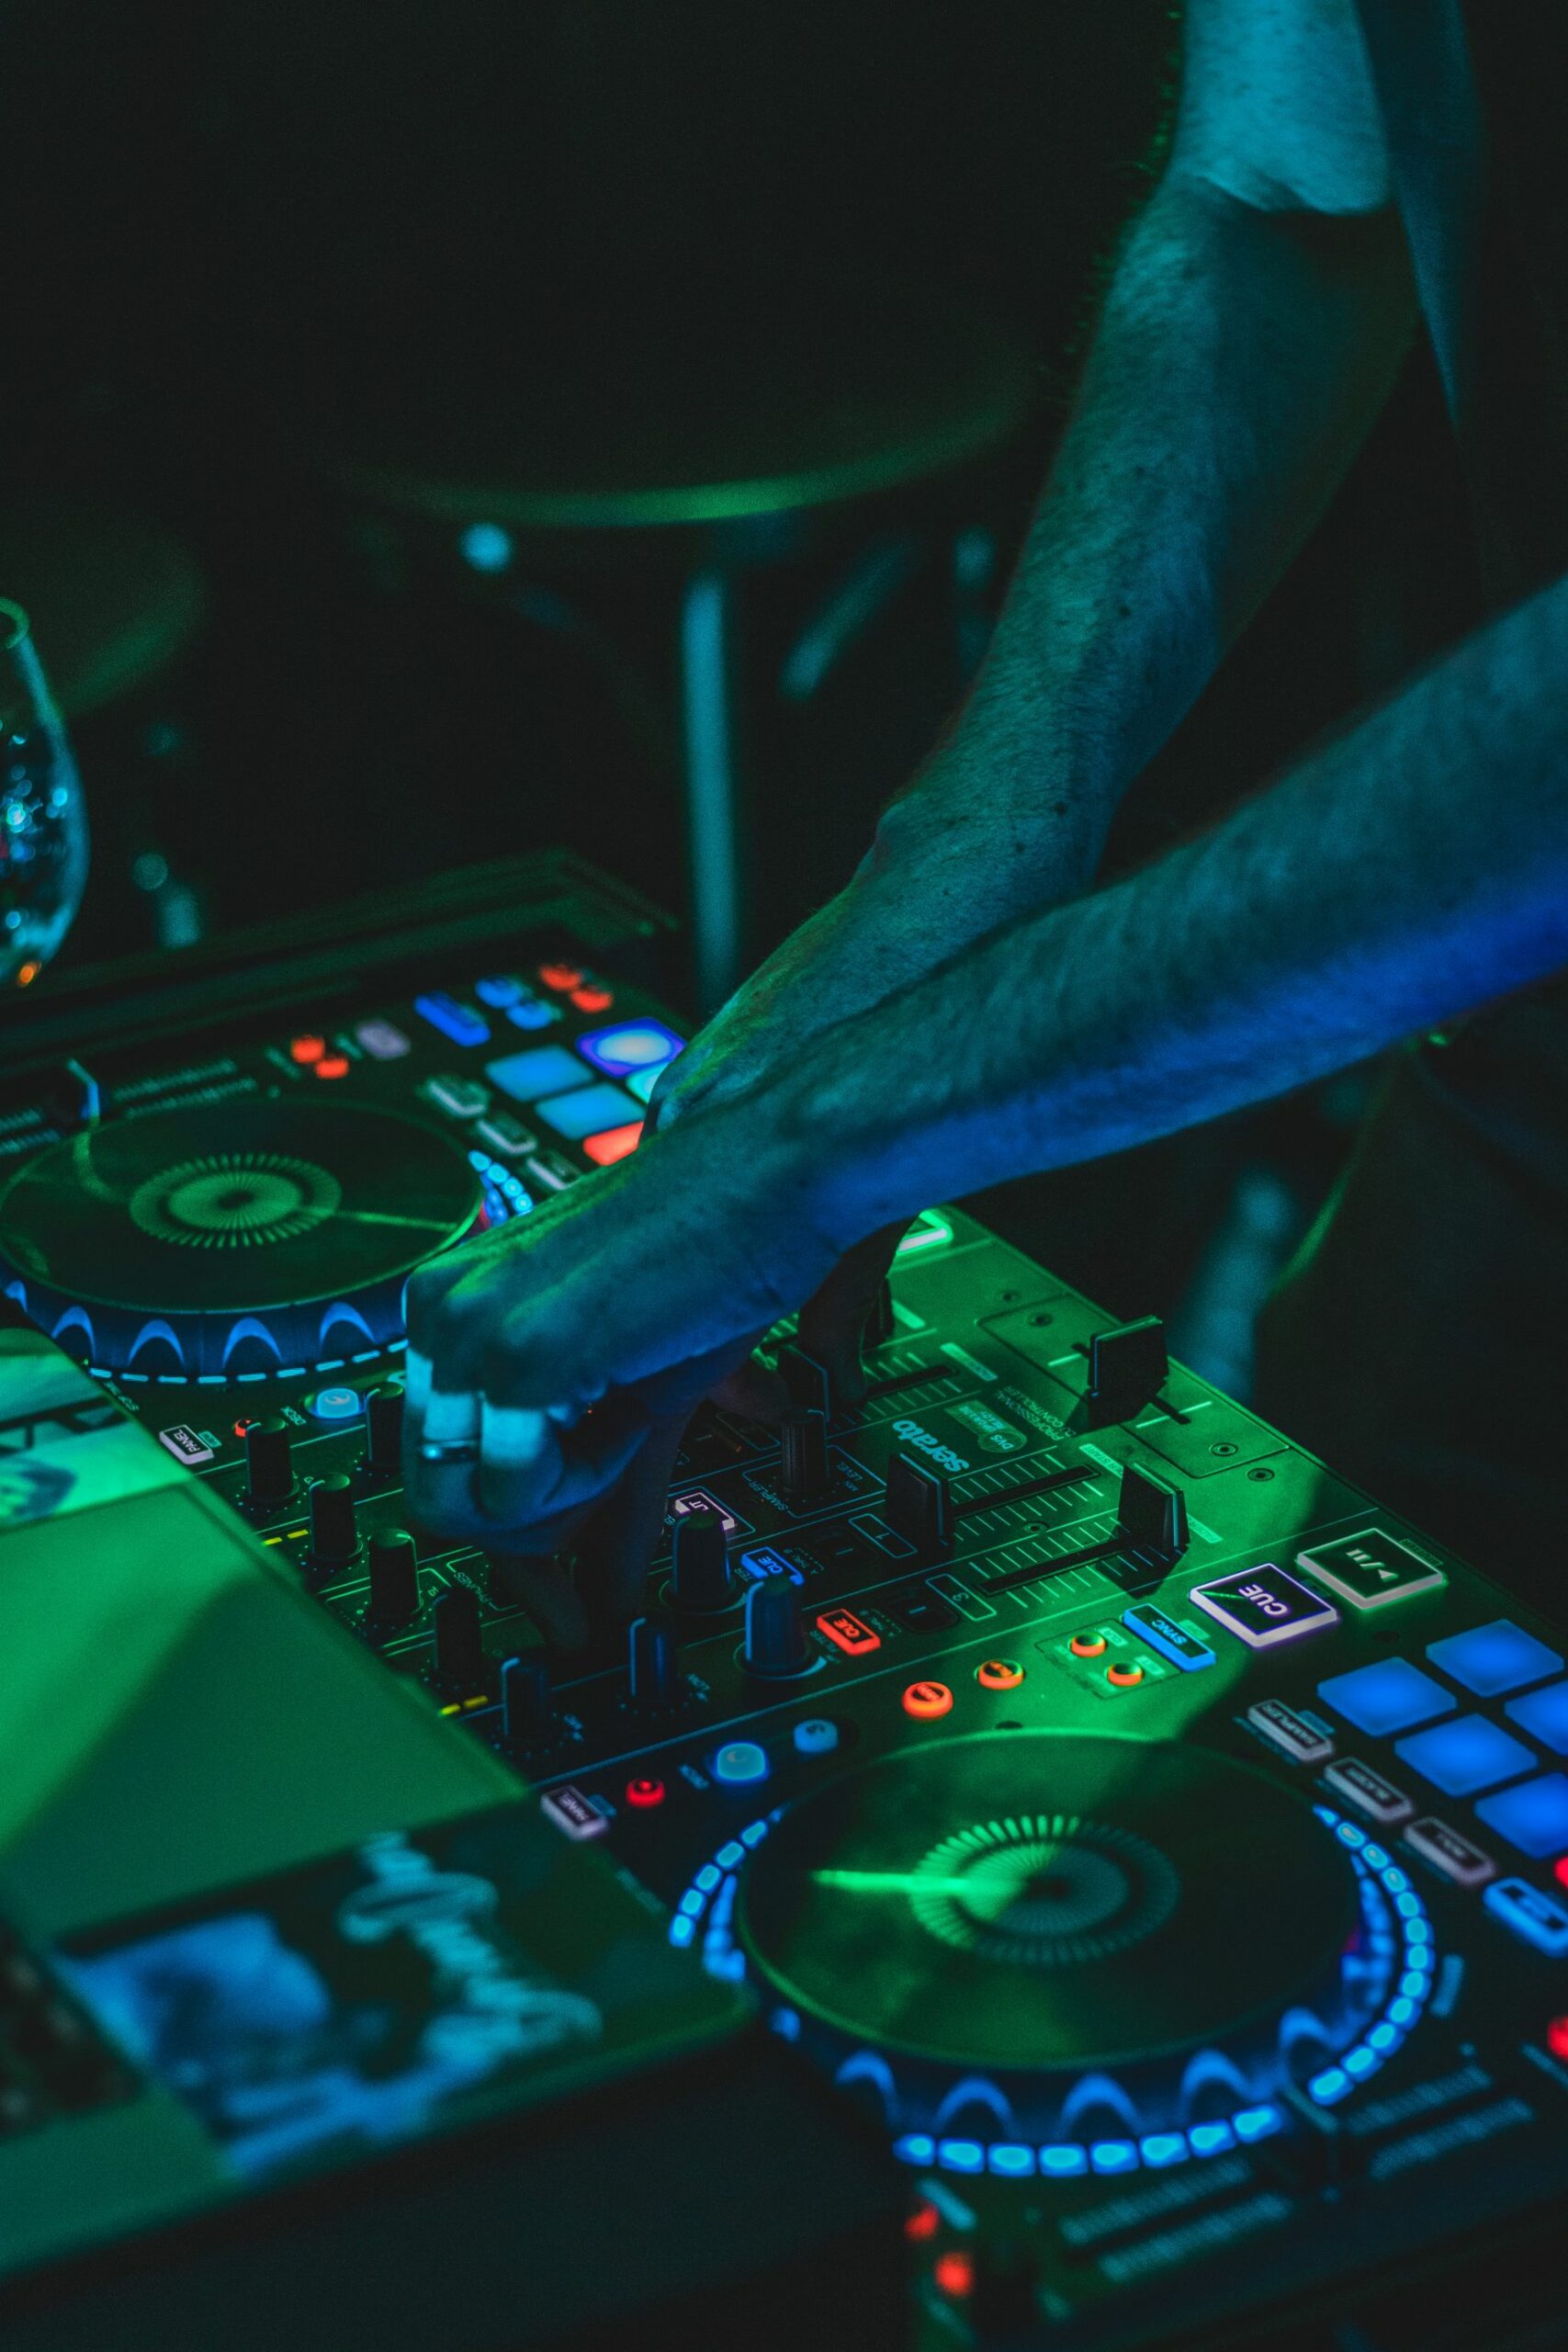 An image of a DJ on the turntables.